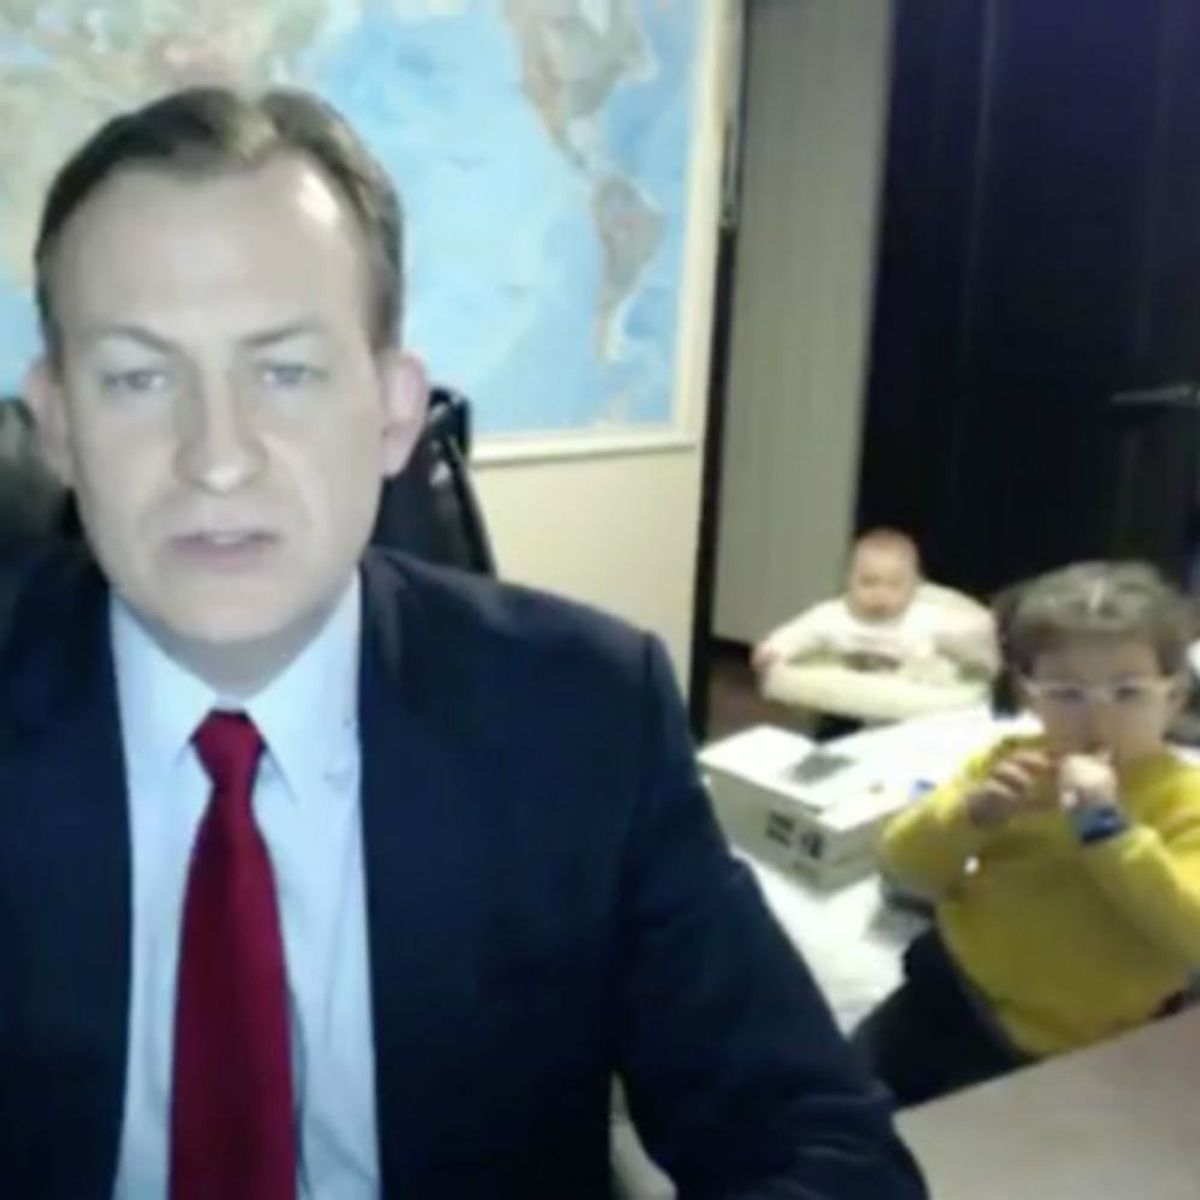 BBC Dad Has Spoken About His Now Infamous Interview and It Will Make You Love Him Even More